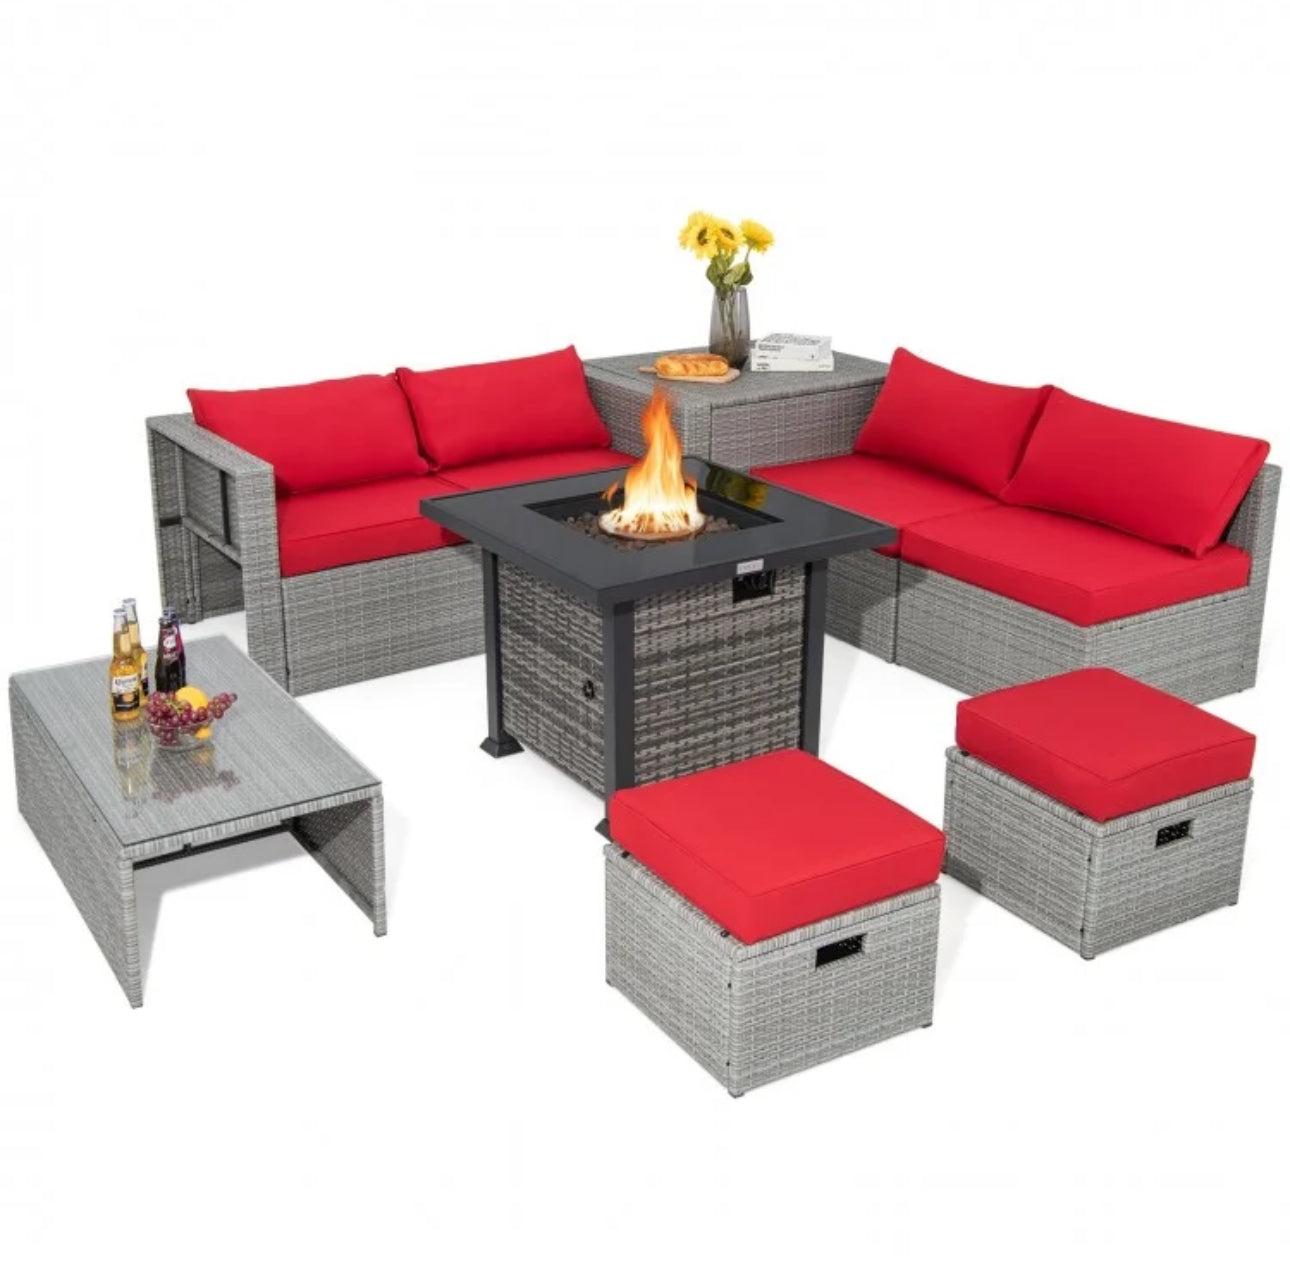 Classy & Elegant 9 Piece Wicker Outdoor Patio Furniture Set With 32 Inch Propane Fire Pit Table | Storage | Cover | Comfy Seating | High Quality | PE Rattan